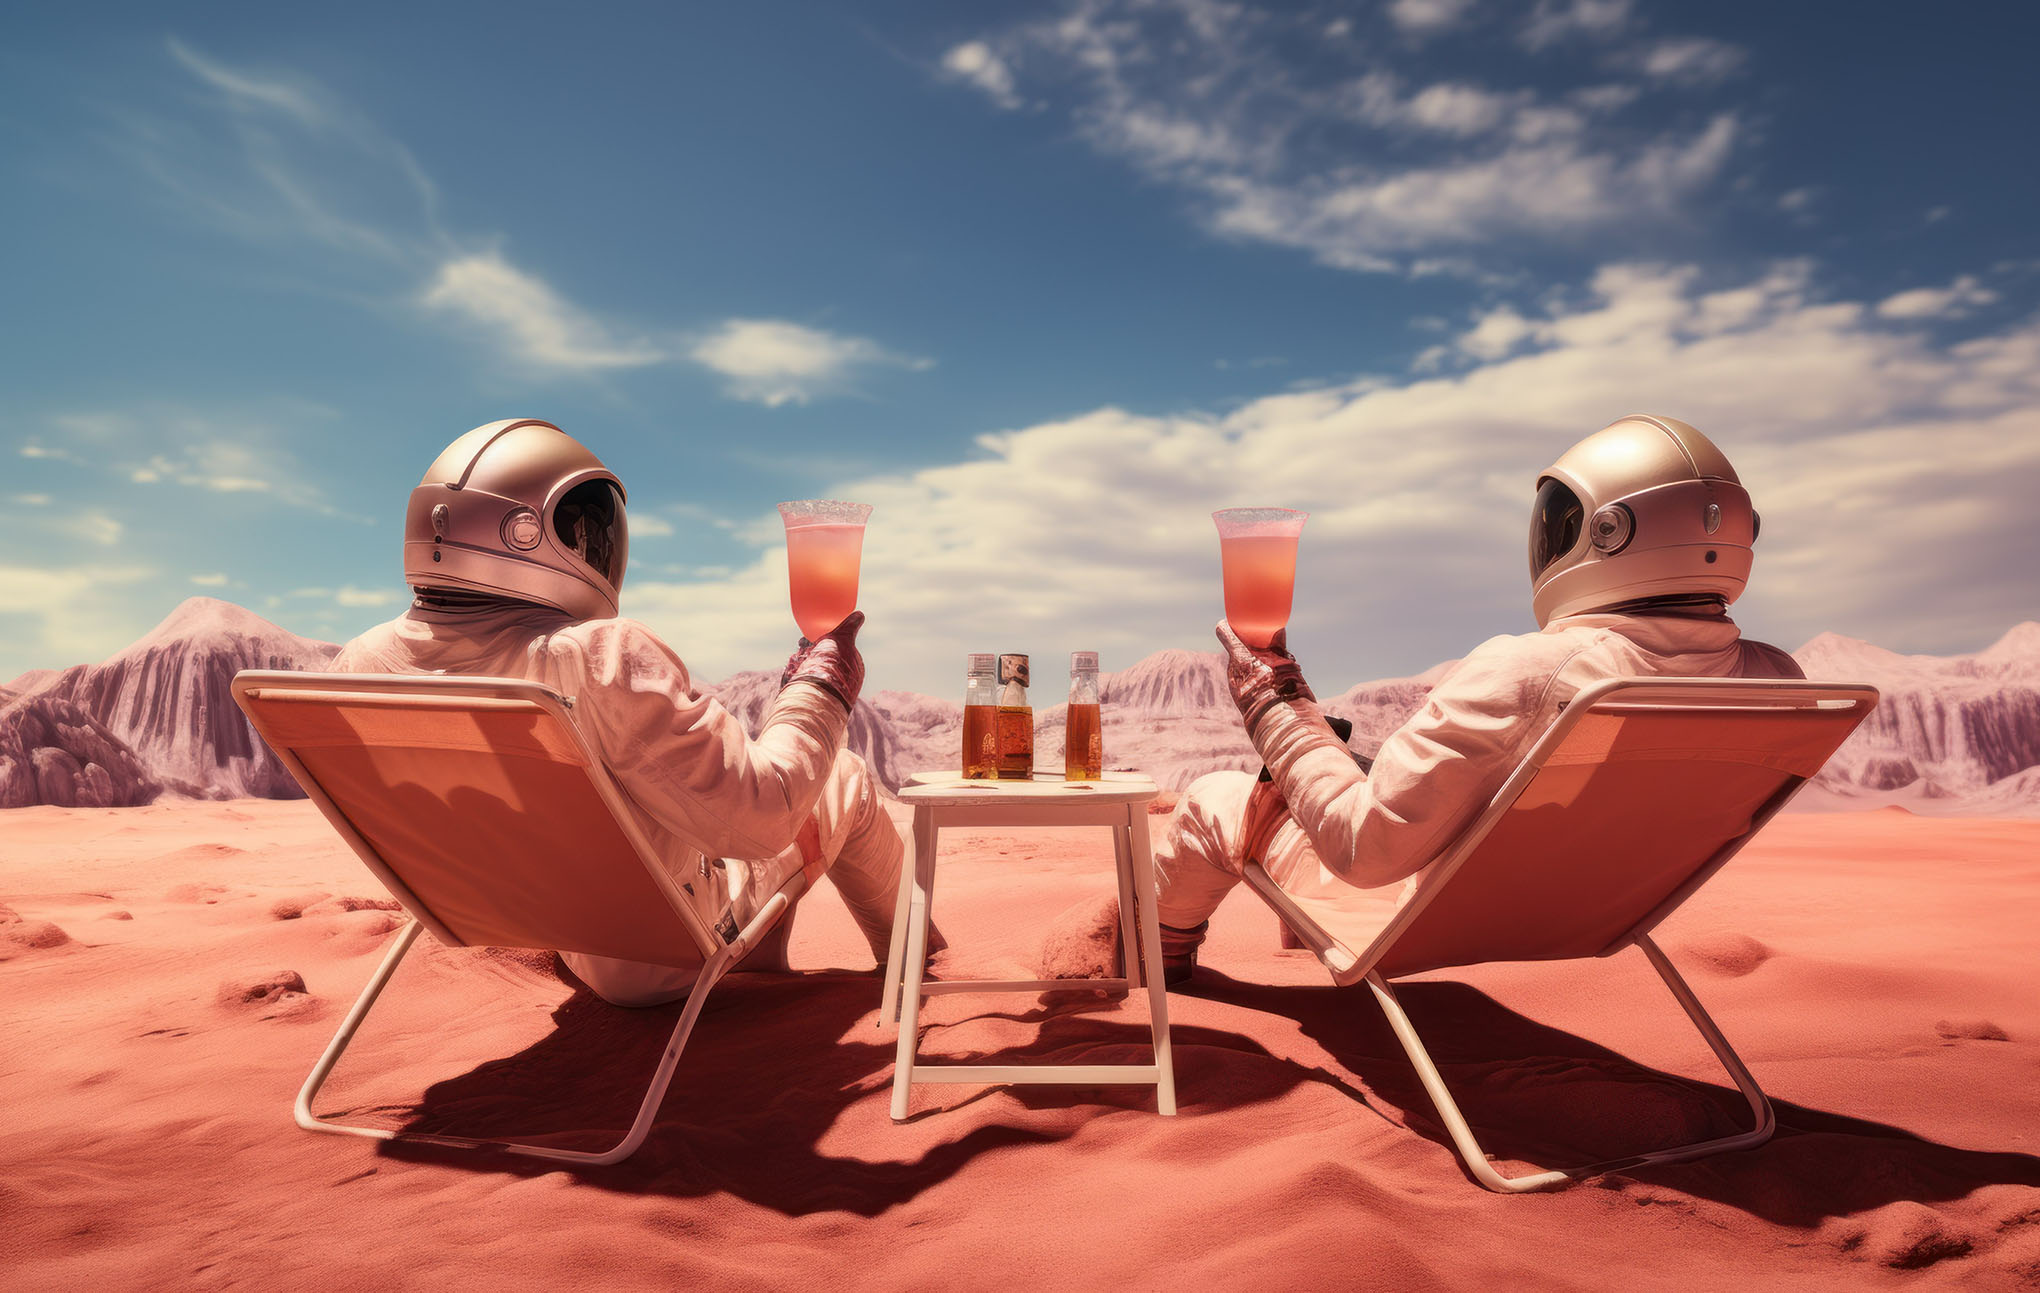 Two astronauts in white space suits are sitting on lounge chairs on a mars-like landscape, relaxing and holding drinks, with a small table between them under a surreal pinkish sky.